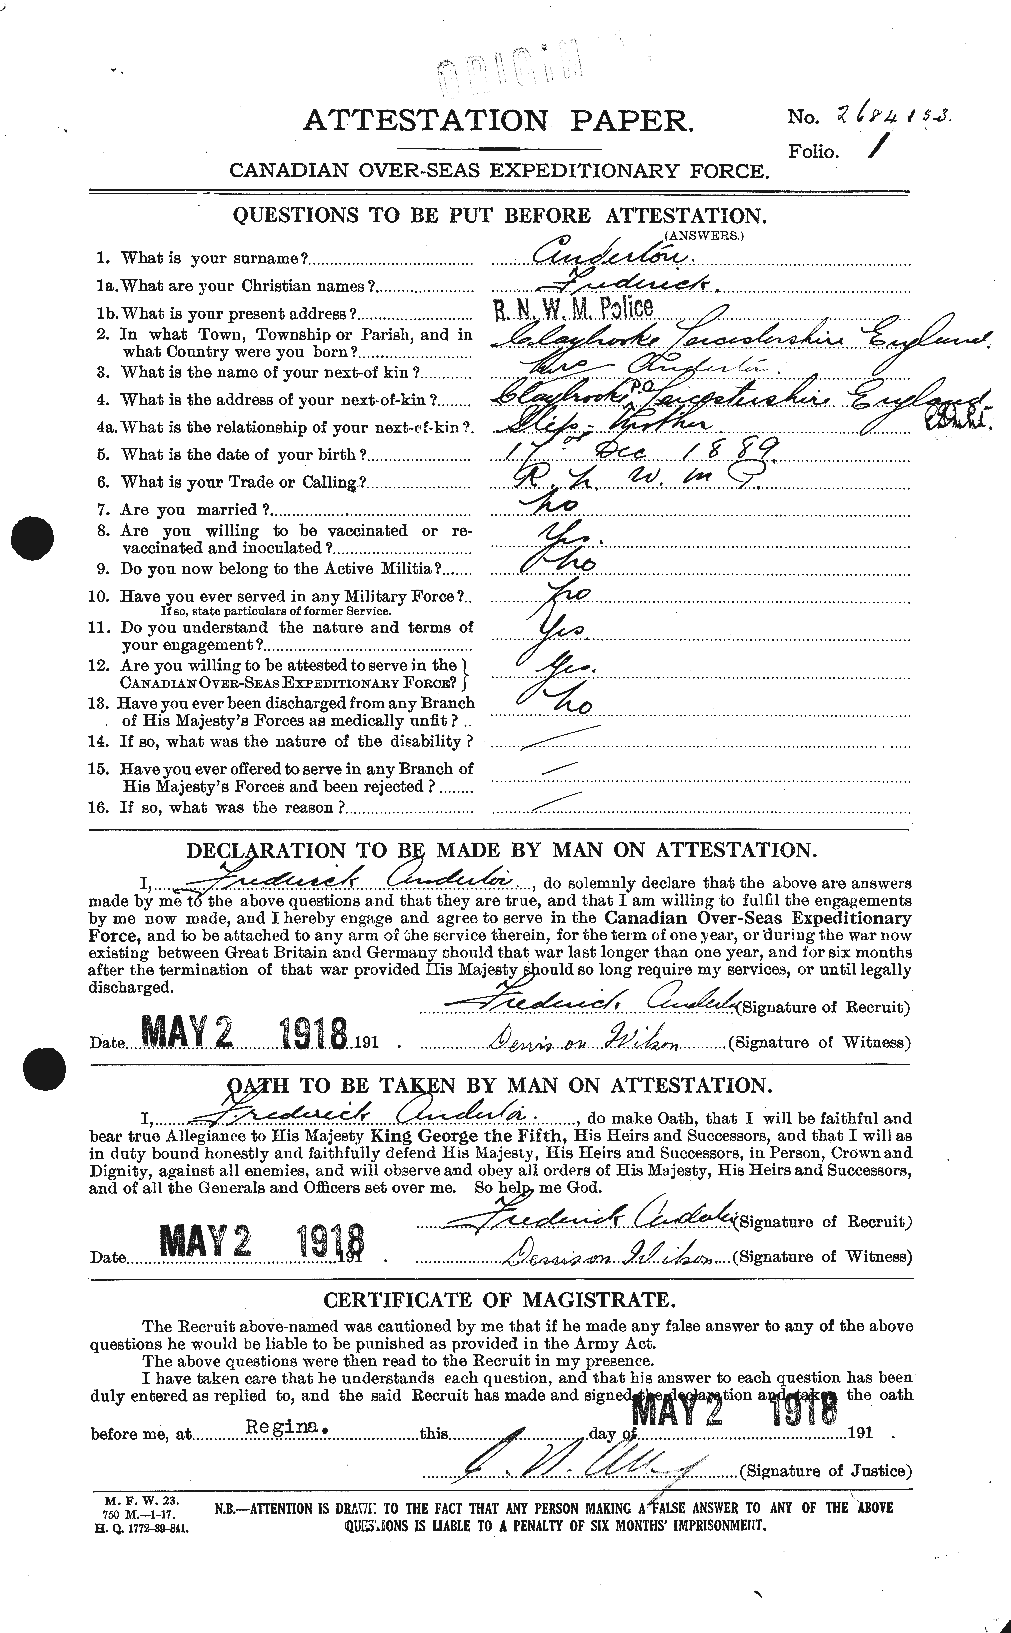 Personnel Records of the First World War - CEF 210657a